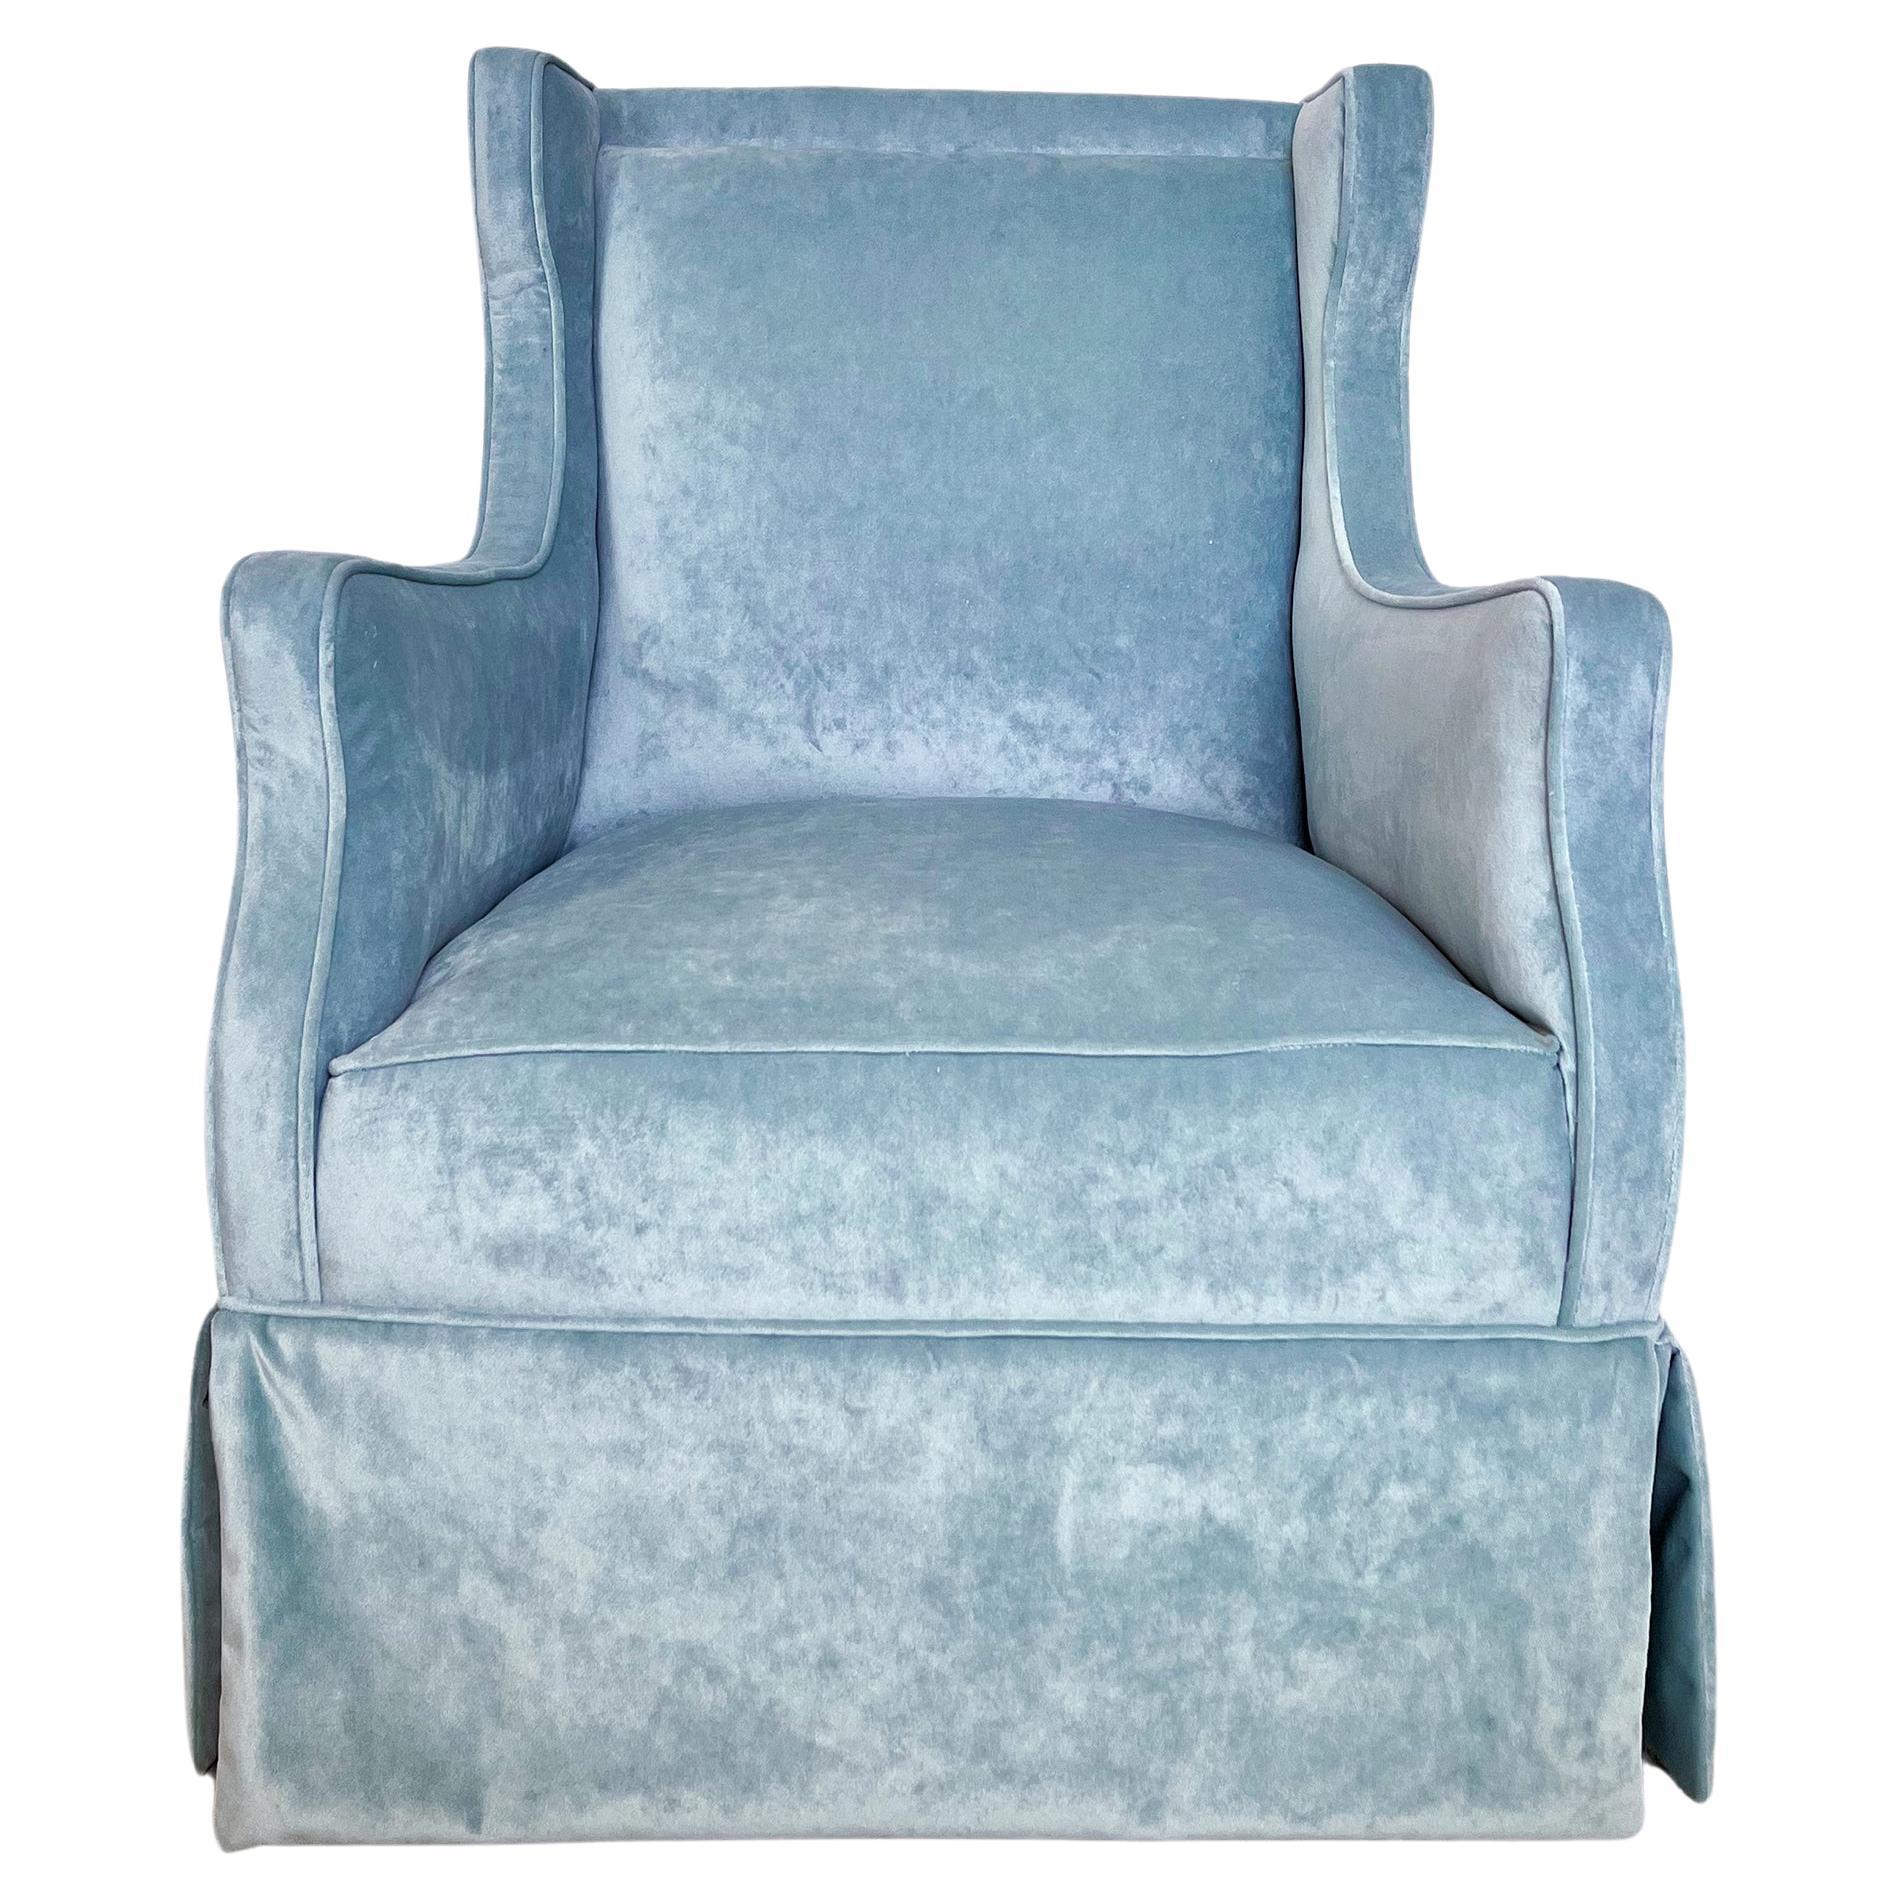 English Art Deco Armchair C.1930

Of neat proportions, having been recently upholstered in a duck egg blue cotton velvet.
England, C.1930.

D67cm
H89cm
W70cm